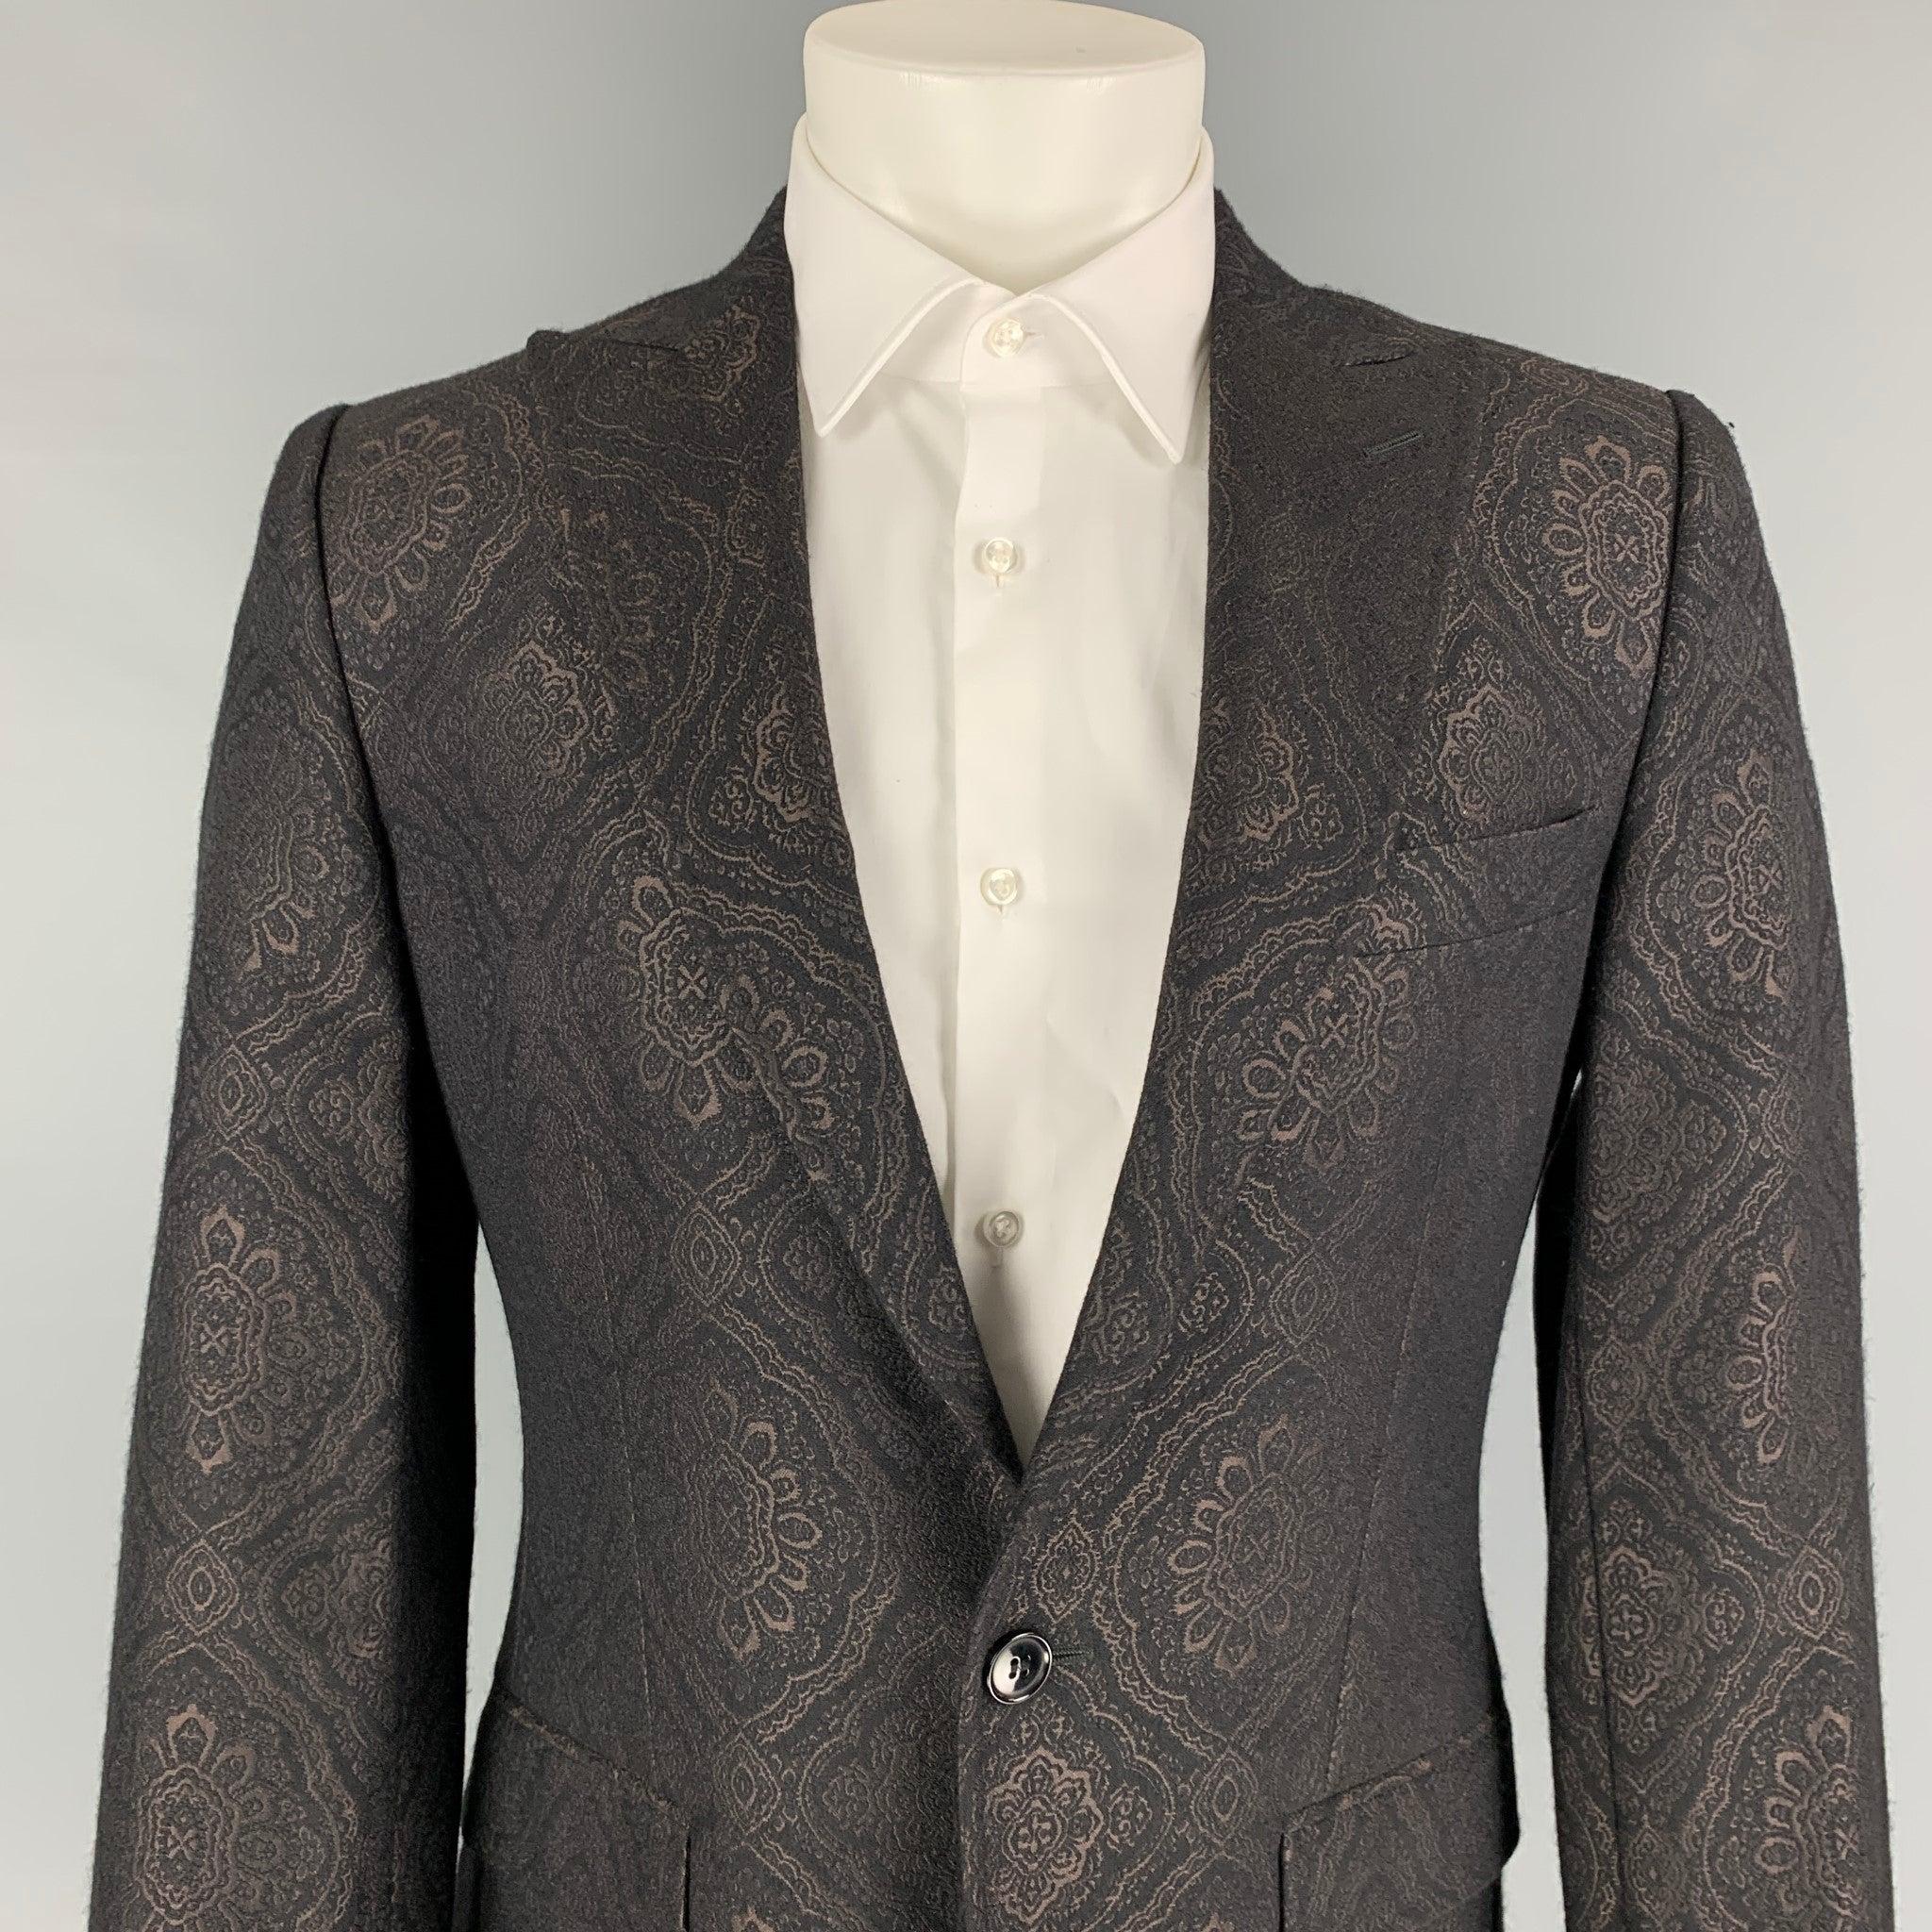 DOLCE & GABBANA sport coat comes in a black & brown jacquard wool with a full liner featuring a peak lapel, flap pockets, single back vent, and a single button closure. Made in Italy.
Very Good
Pre-Owned Condition. 

Marked:   48 

Measurements: 
